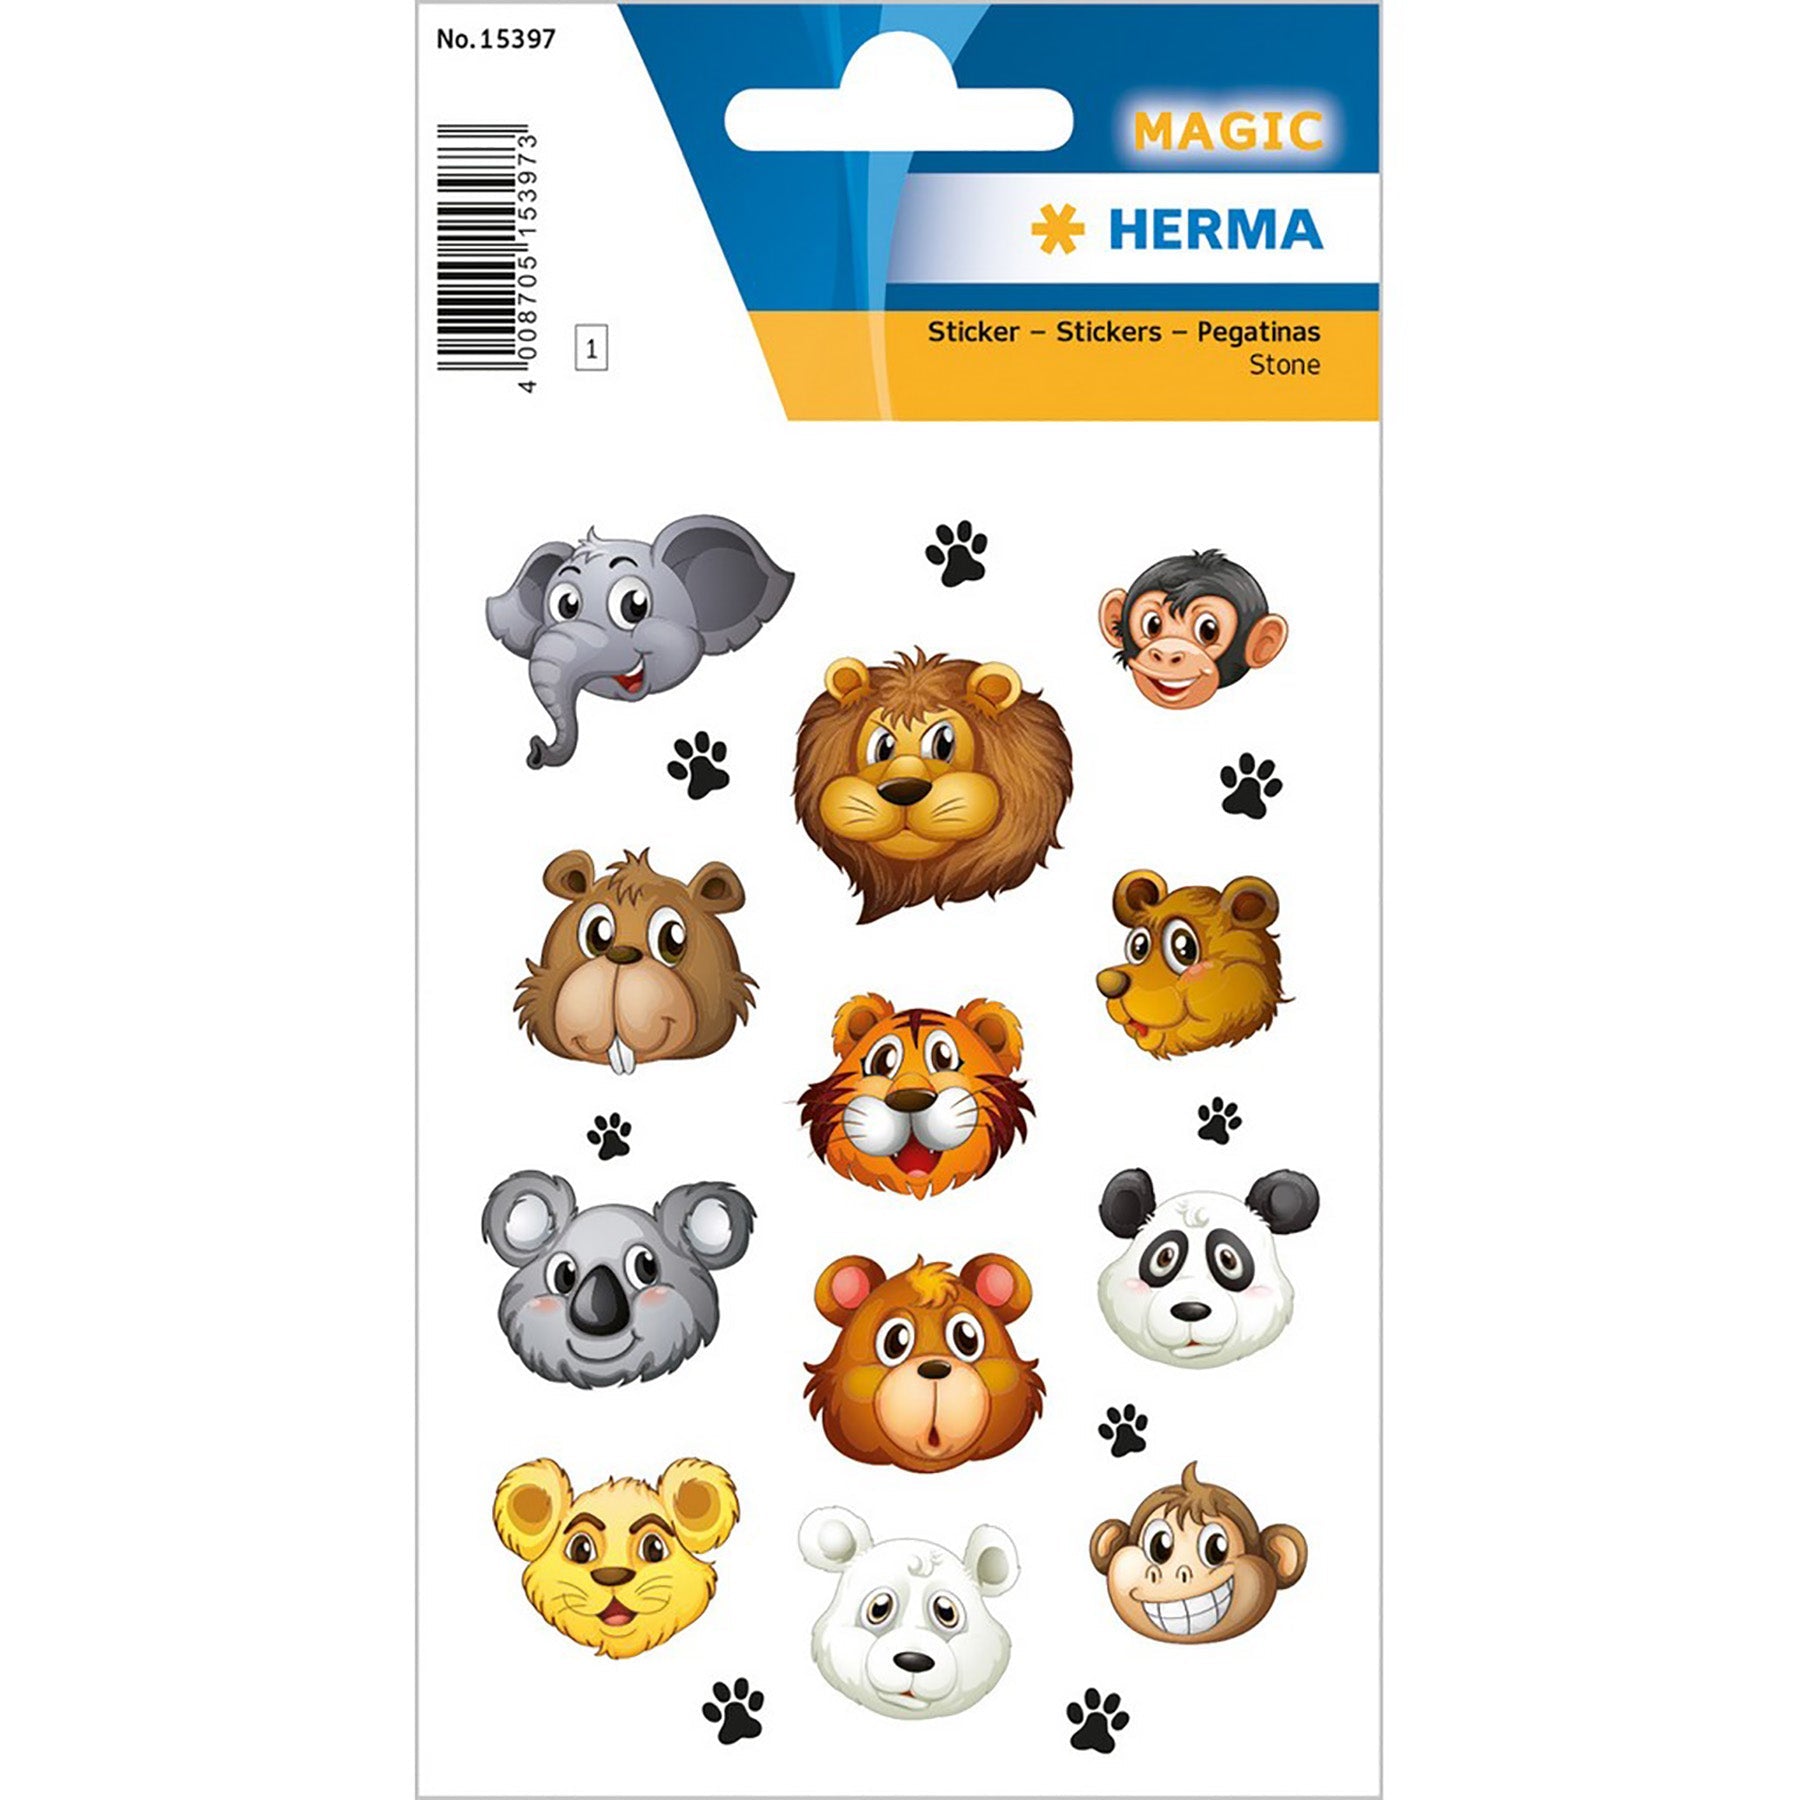 Herma Magic Stickers Animal Faces Transpuffy 4.75x3.1in Sheet